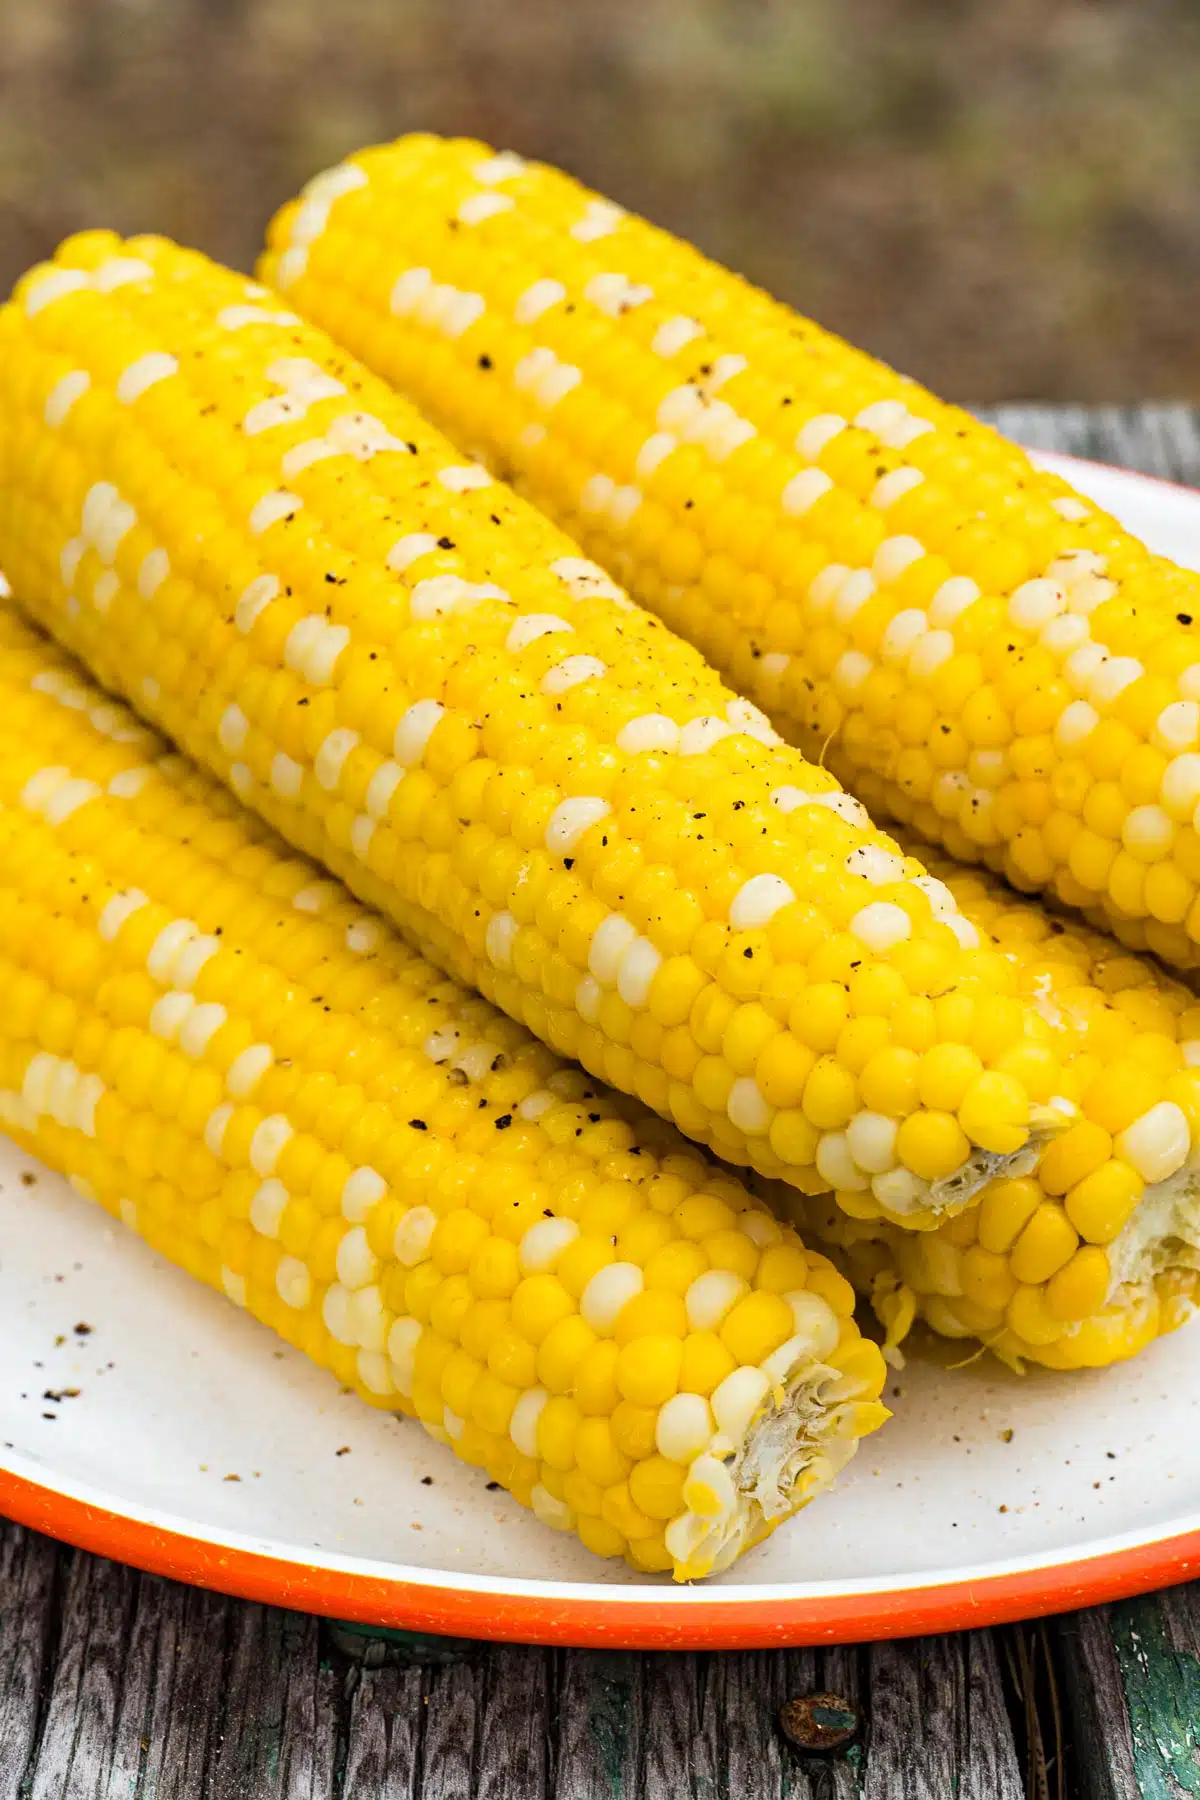 Four ears of corn on the cob, featuring bright yellow and white kernels, are placed on a white plate with an orange rim, set on a wooden surface.